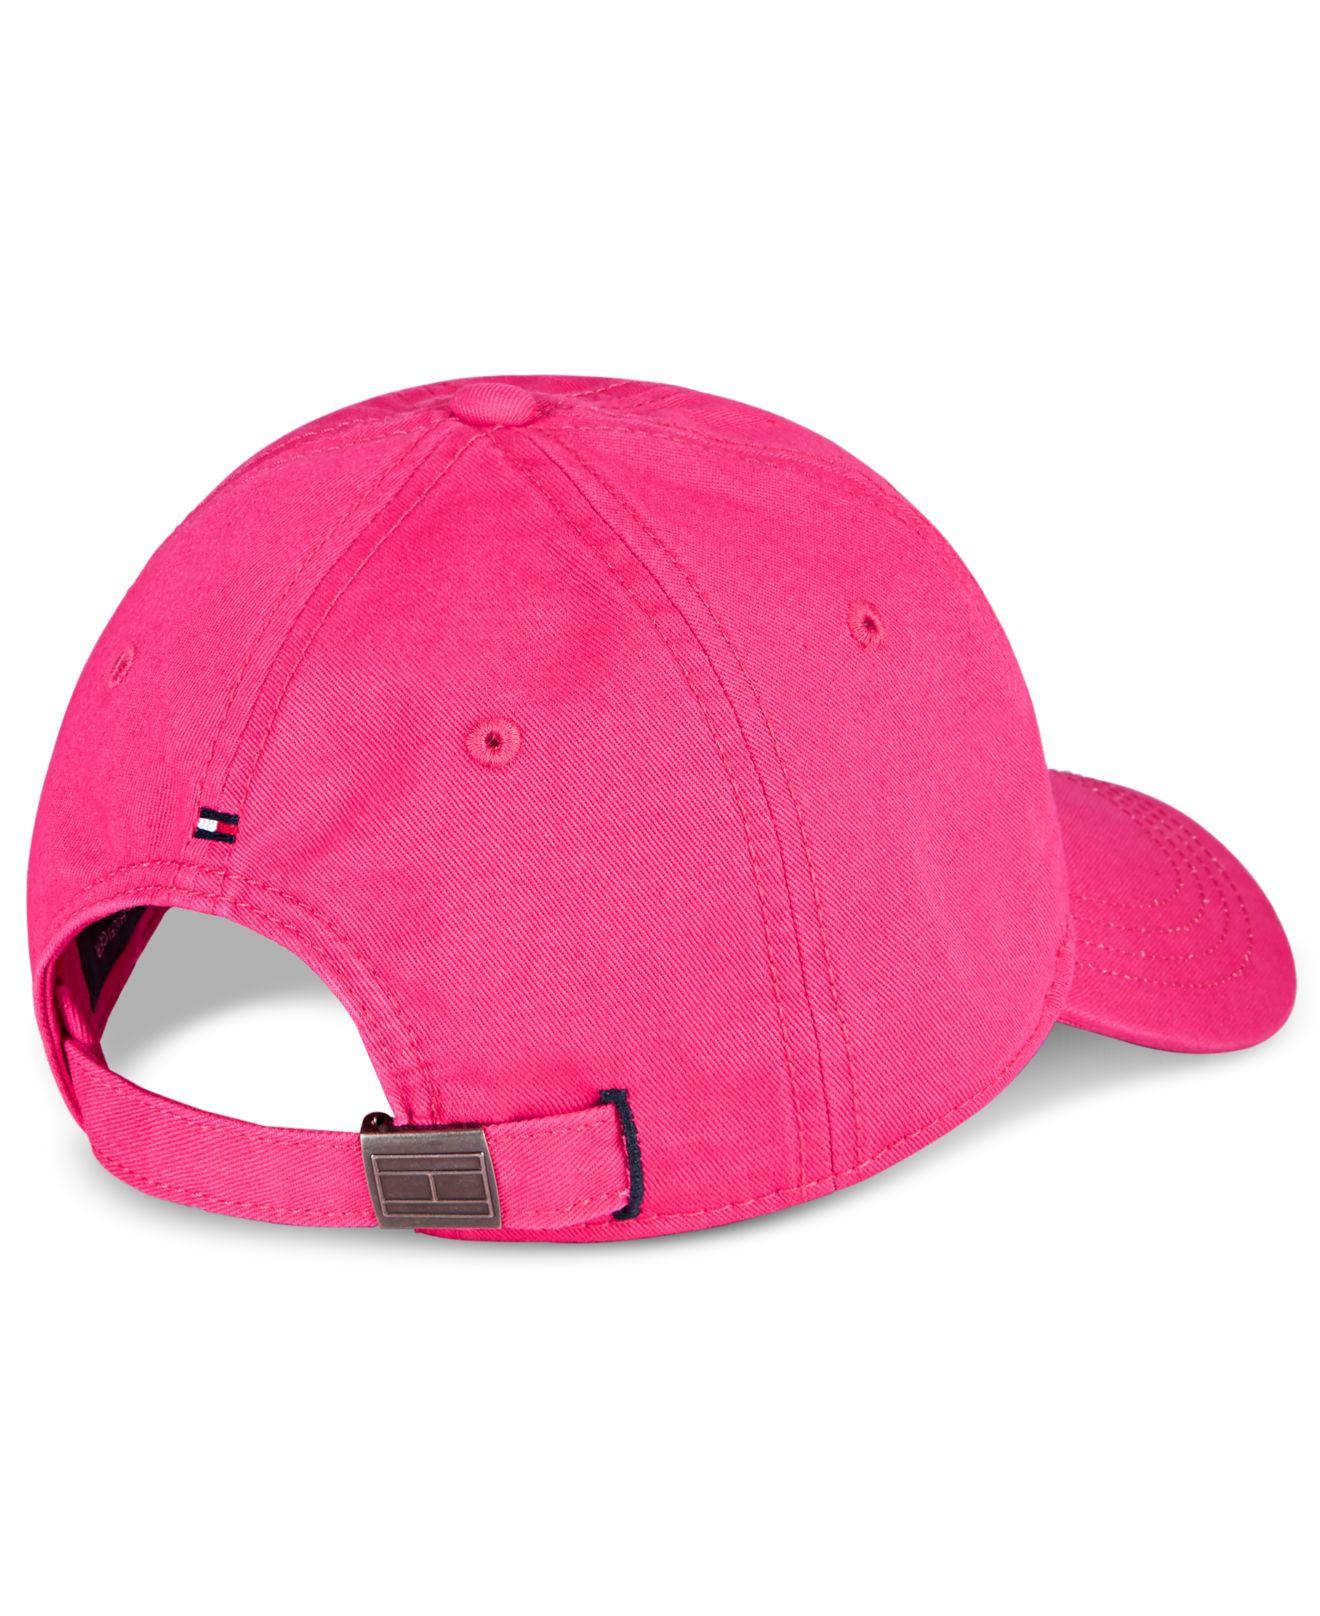 Tommy Hilfiger Throwback Embroidered Logo Cap in Pink for Men - Lyst